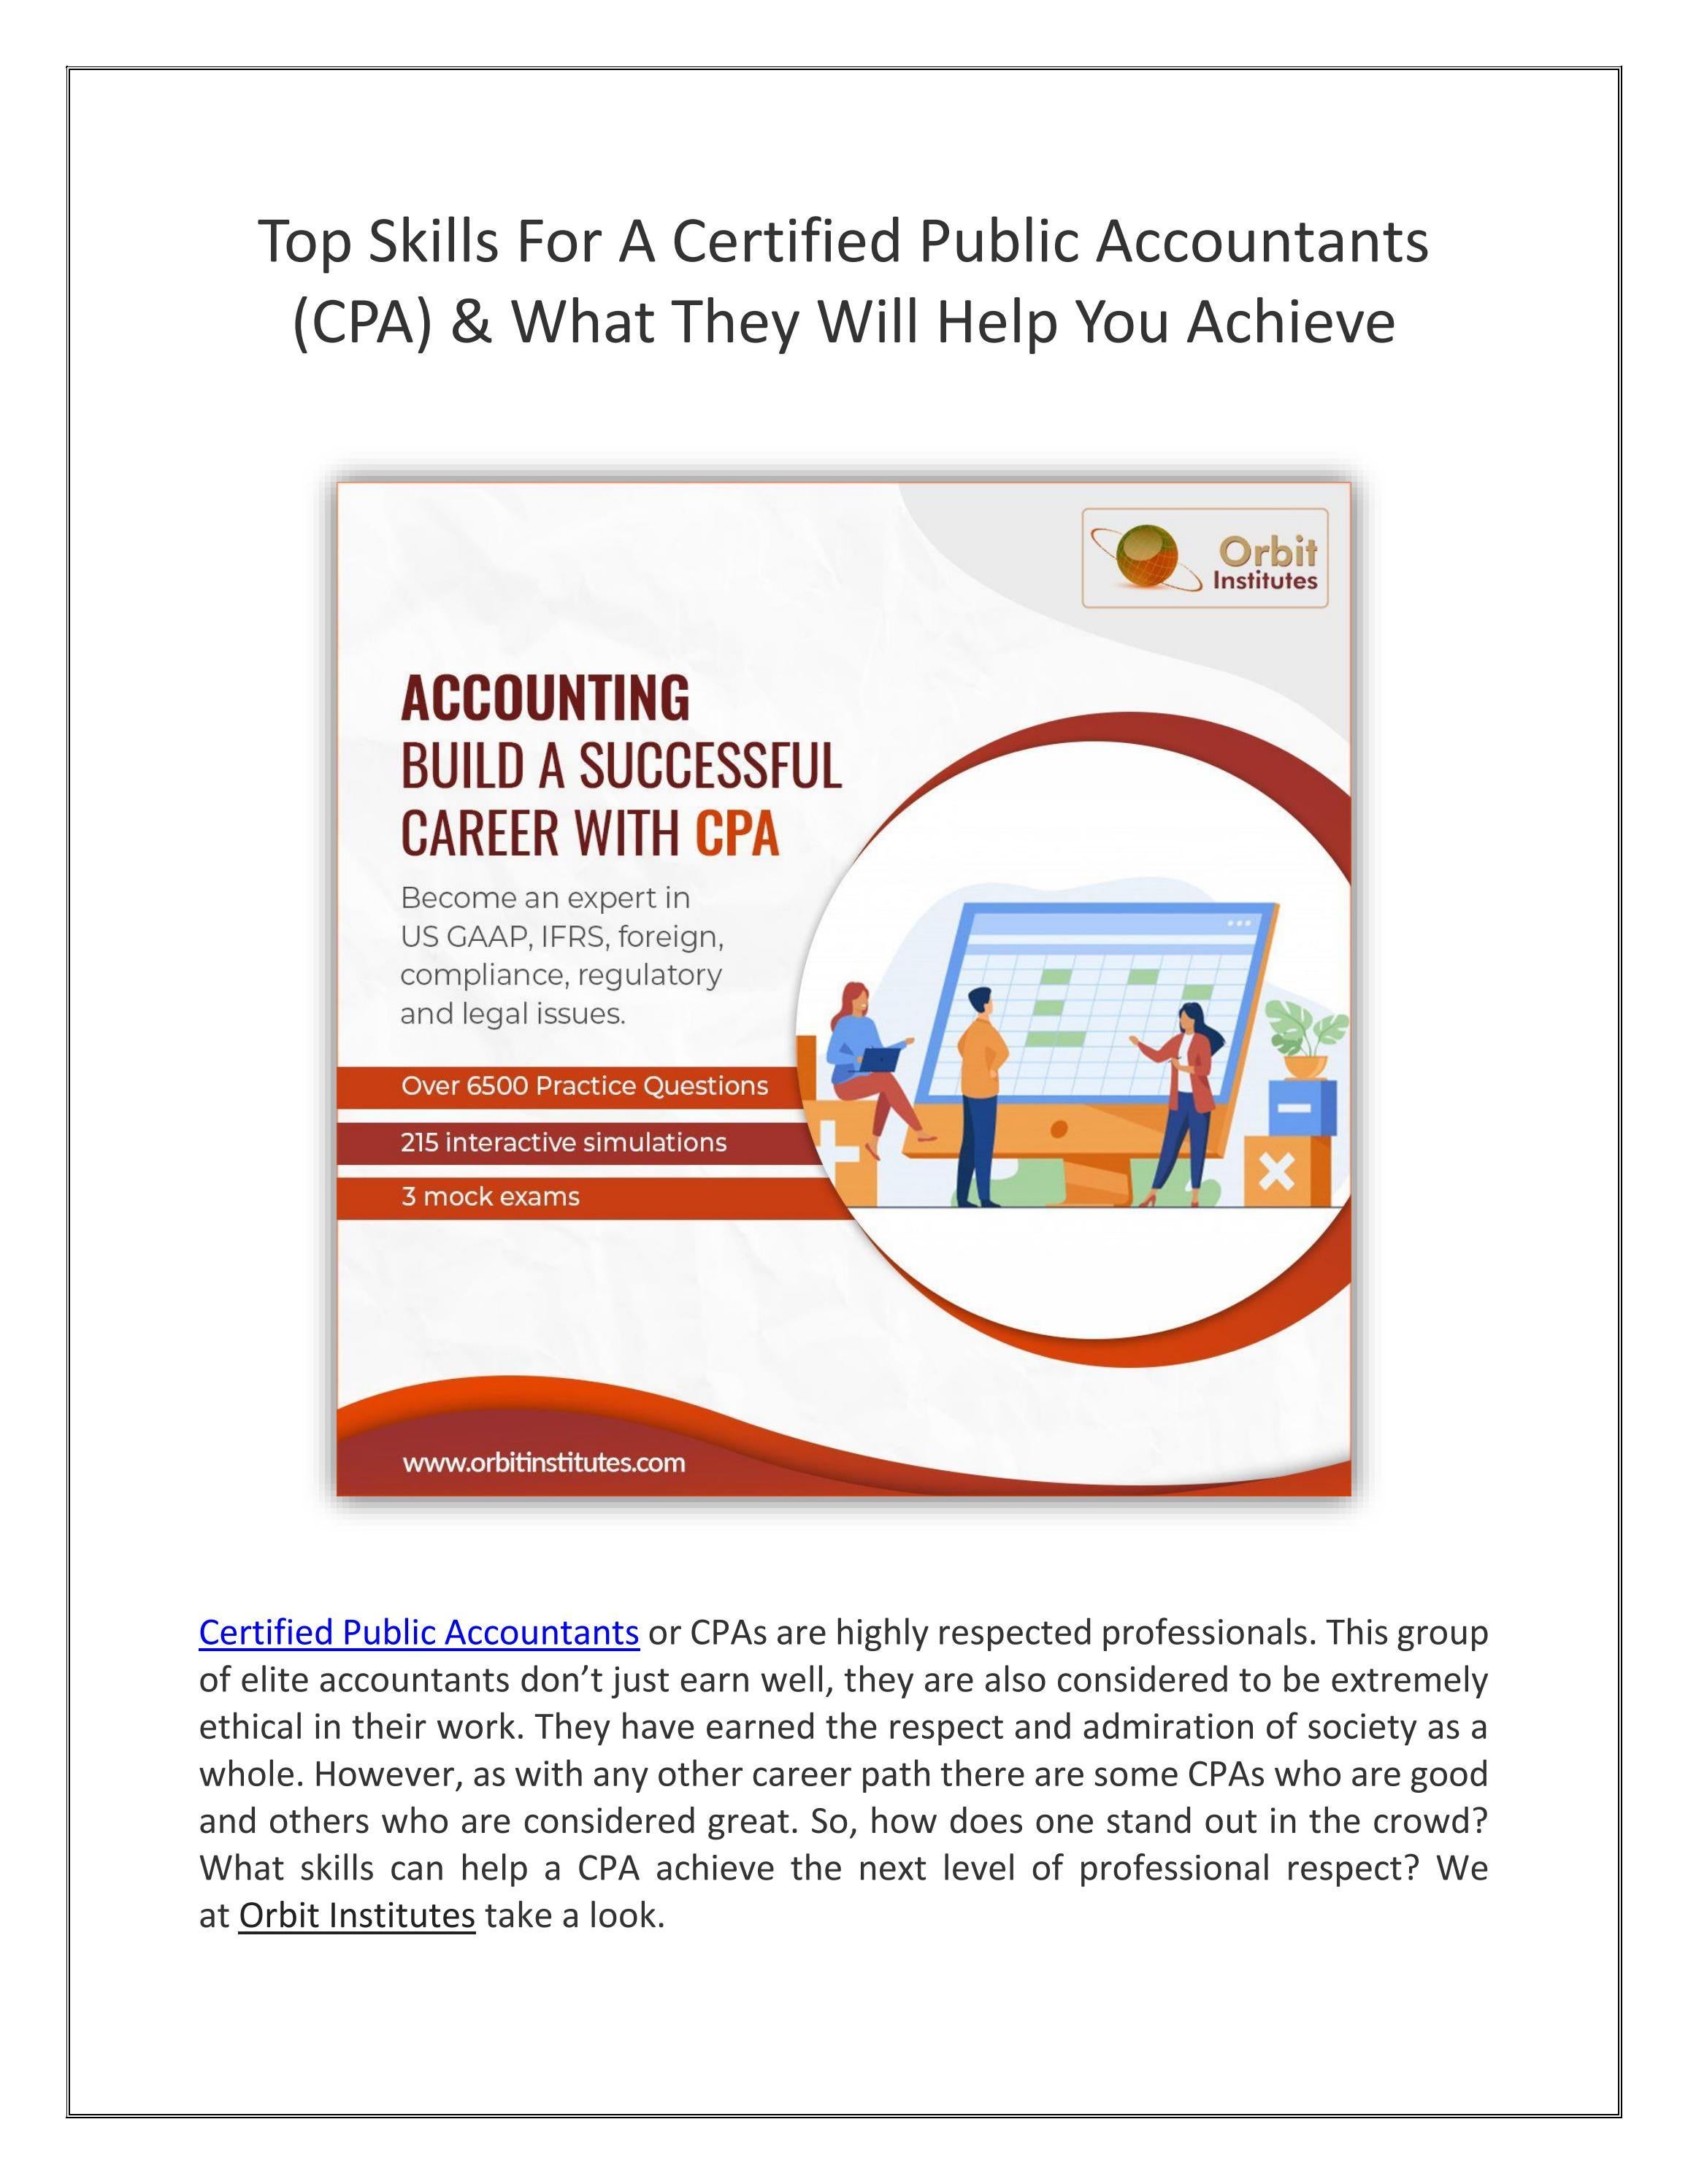 Top Skills For A Certified Public Accountants (CPA)